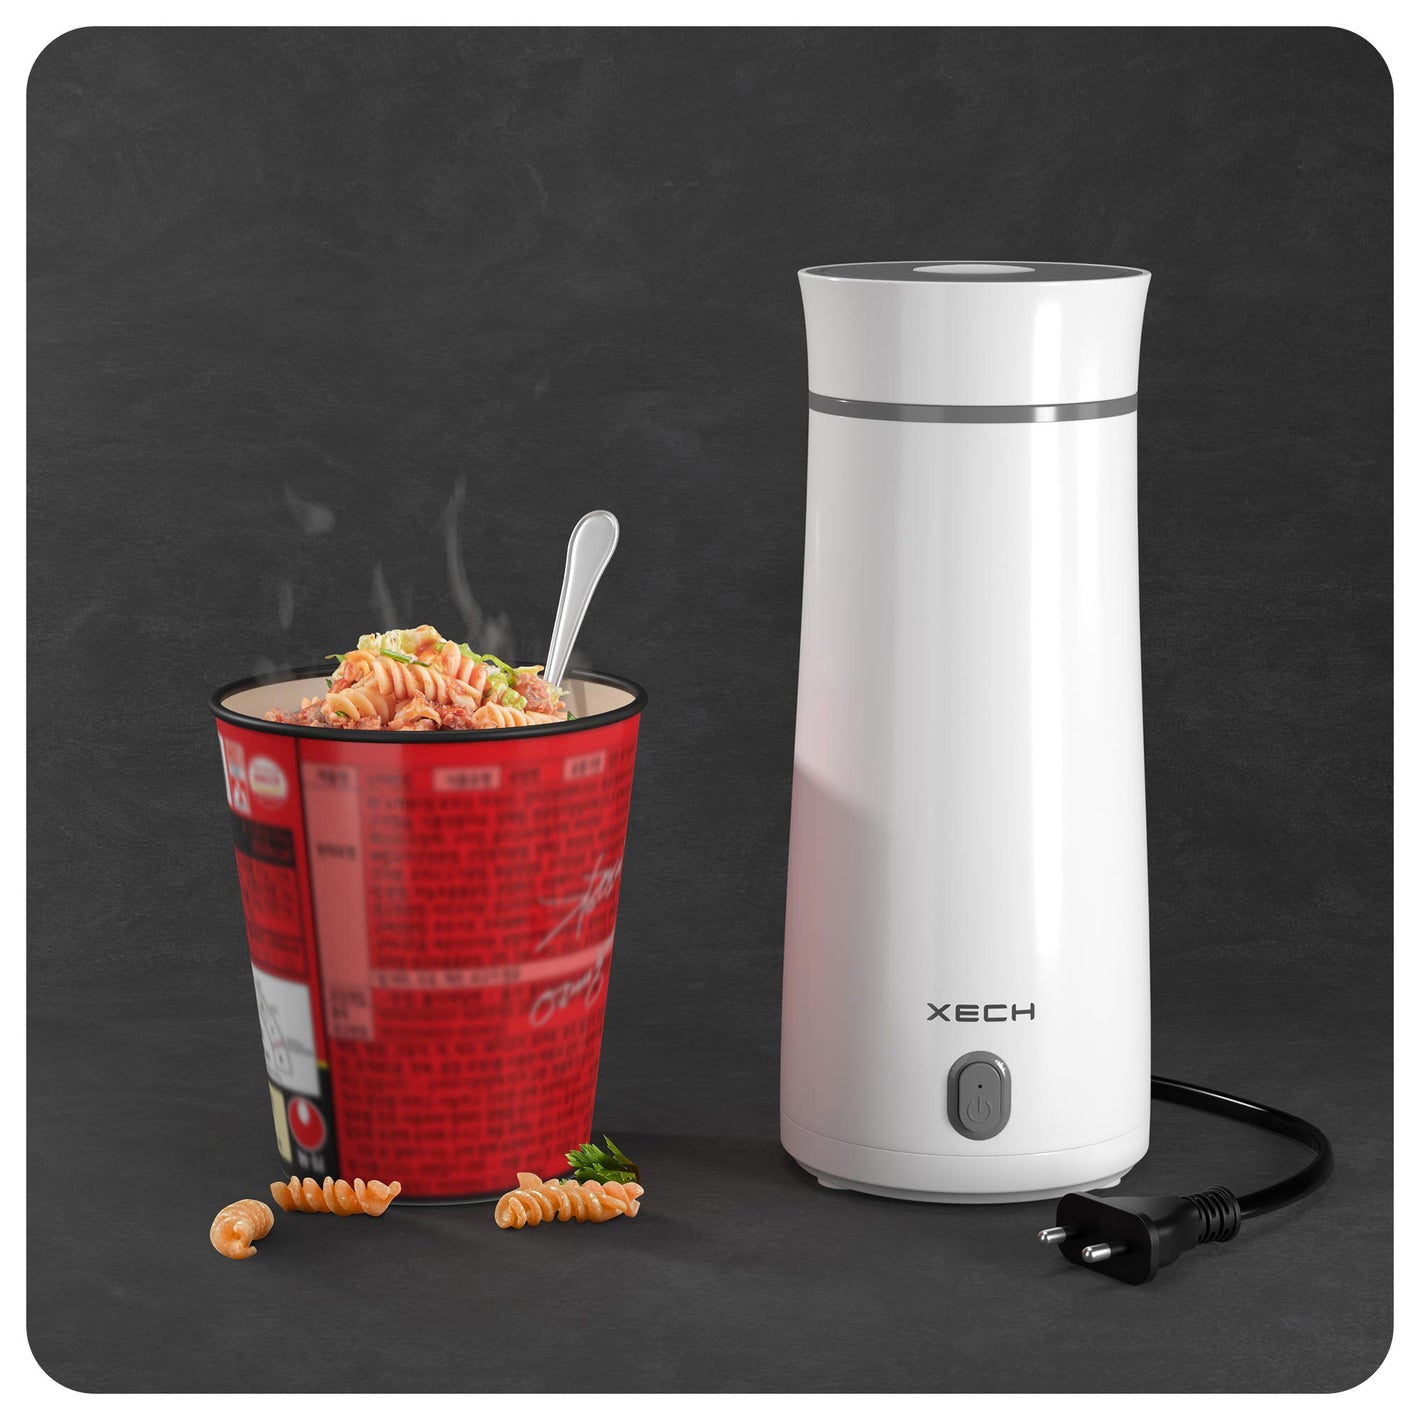 Discover the best kettle brand in India for your home and travels, perfect for preparing instant noodles wherever your are!